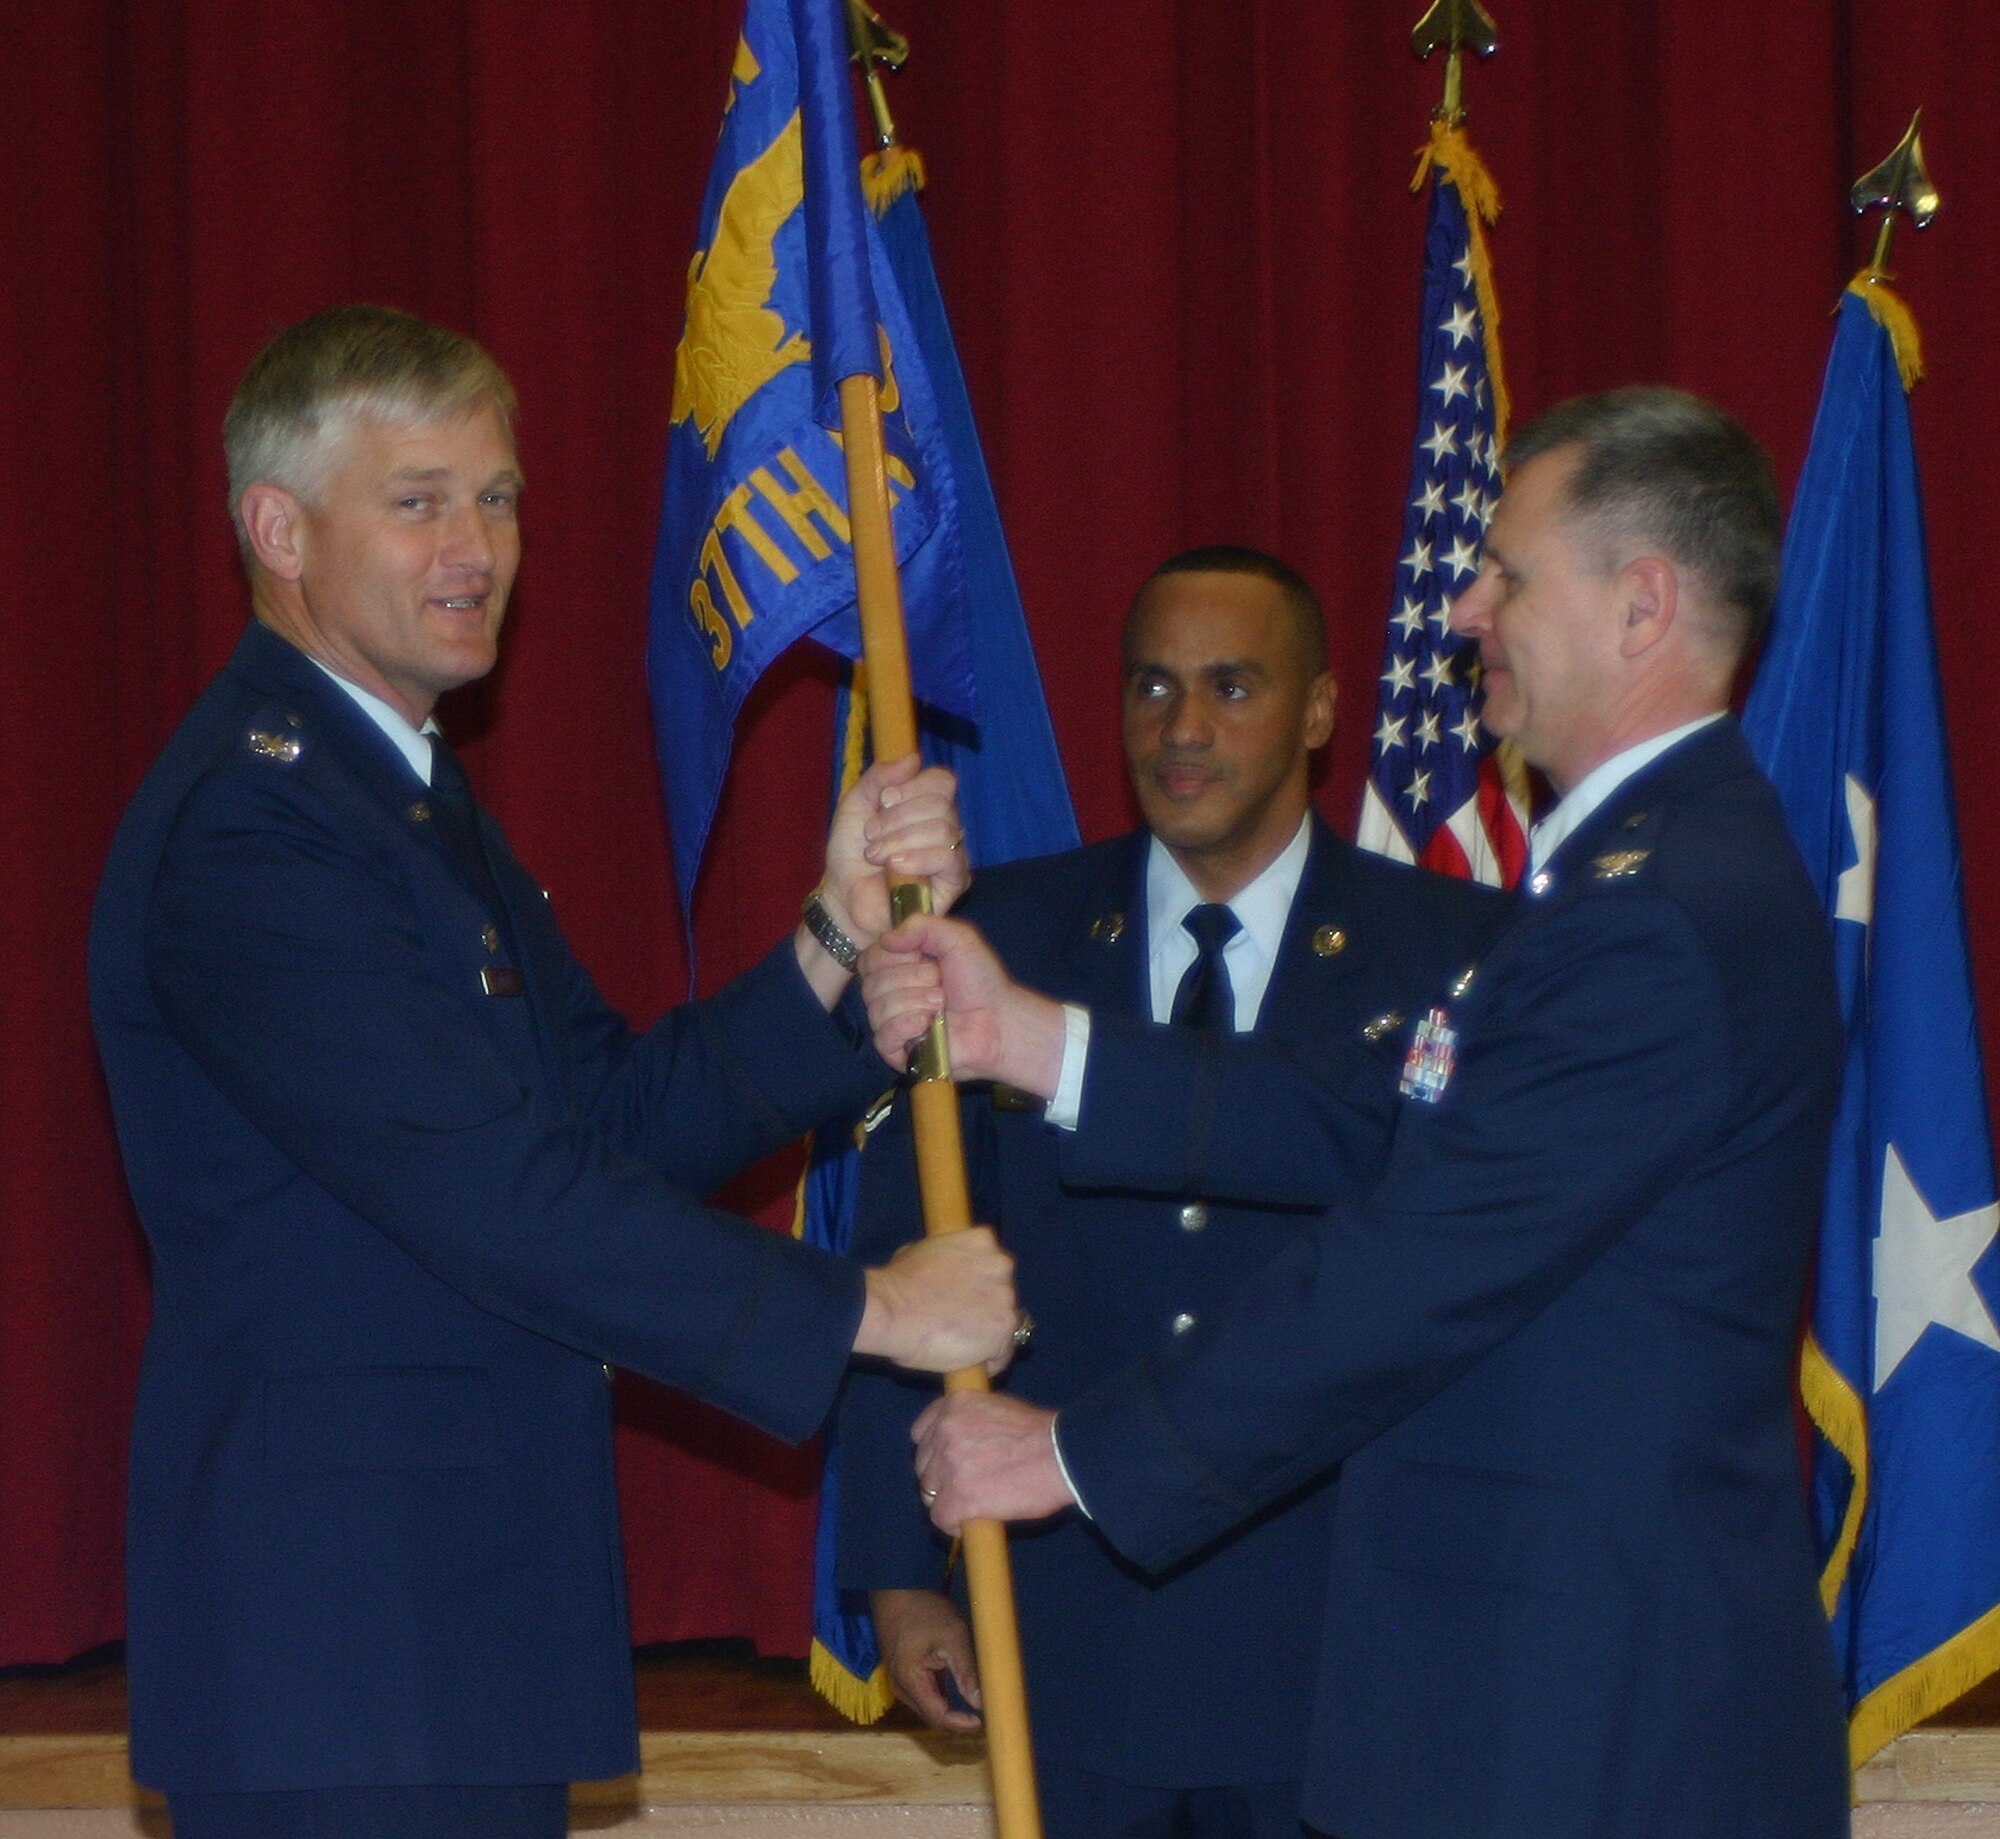 Col. William Mott, 37th Training Wing commander (left), takes the 37th Medical Group guidon from its commander, Col.l (Dr.) Rick L. Campise, during a ceremony at Lackland Air Force Base, Texas, Feb. 1, where the medical group was inactivated. The group was immediately activated as the 559th MDG under the 59th Medical Wing. (U.S. photo by Sue Campbell)